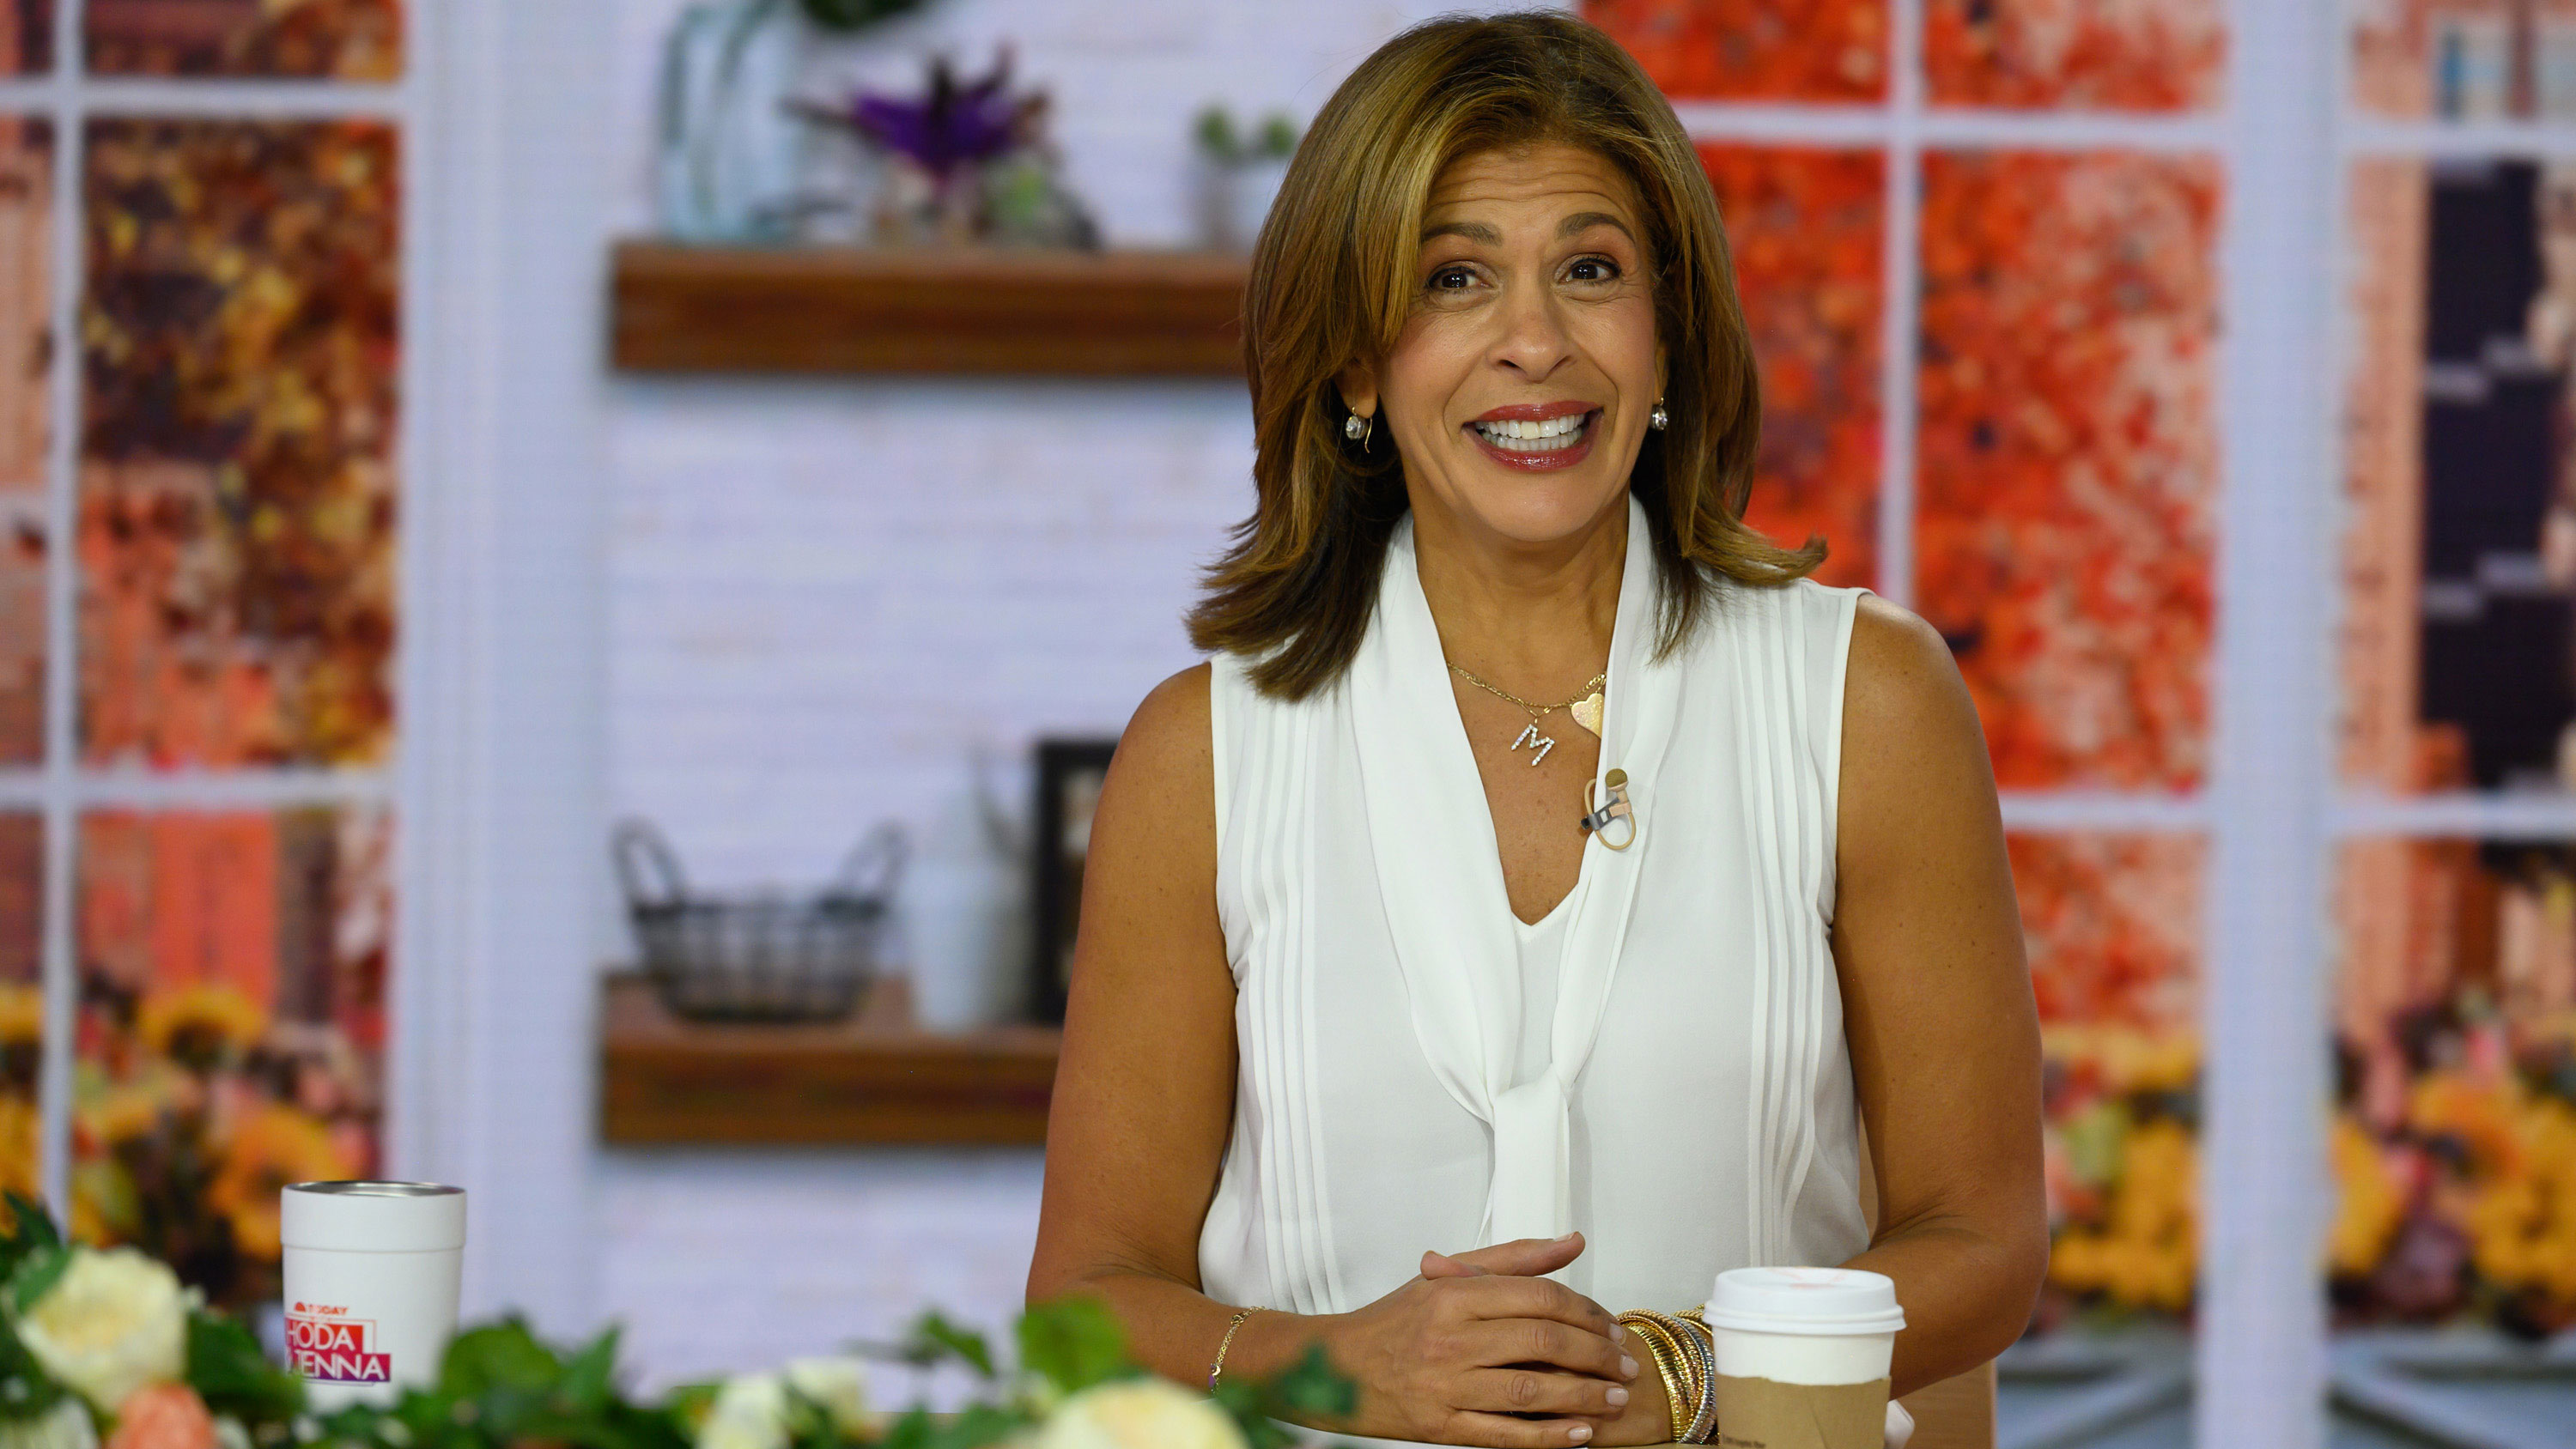 Hoda Kotb's daughters wear big smiles in adorable new photos with  rarely-seen relatives from celebratory family moment | HELLO!